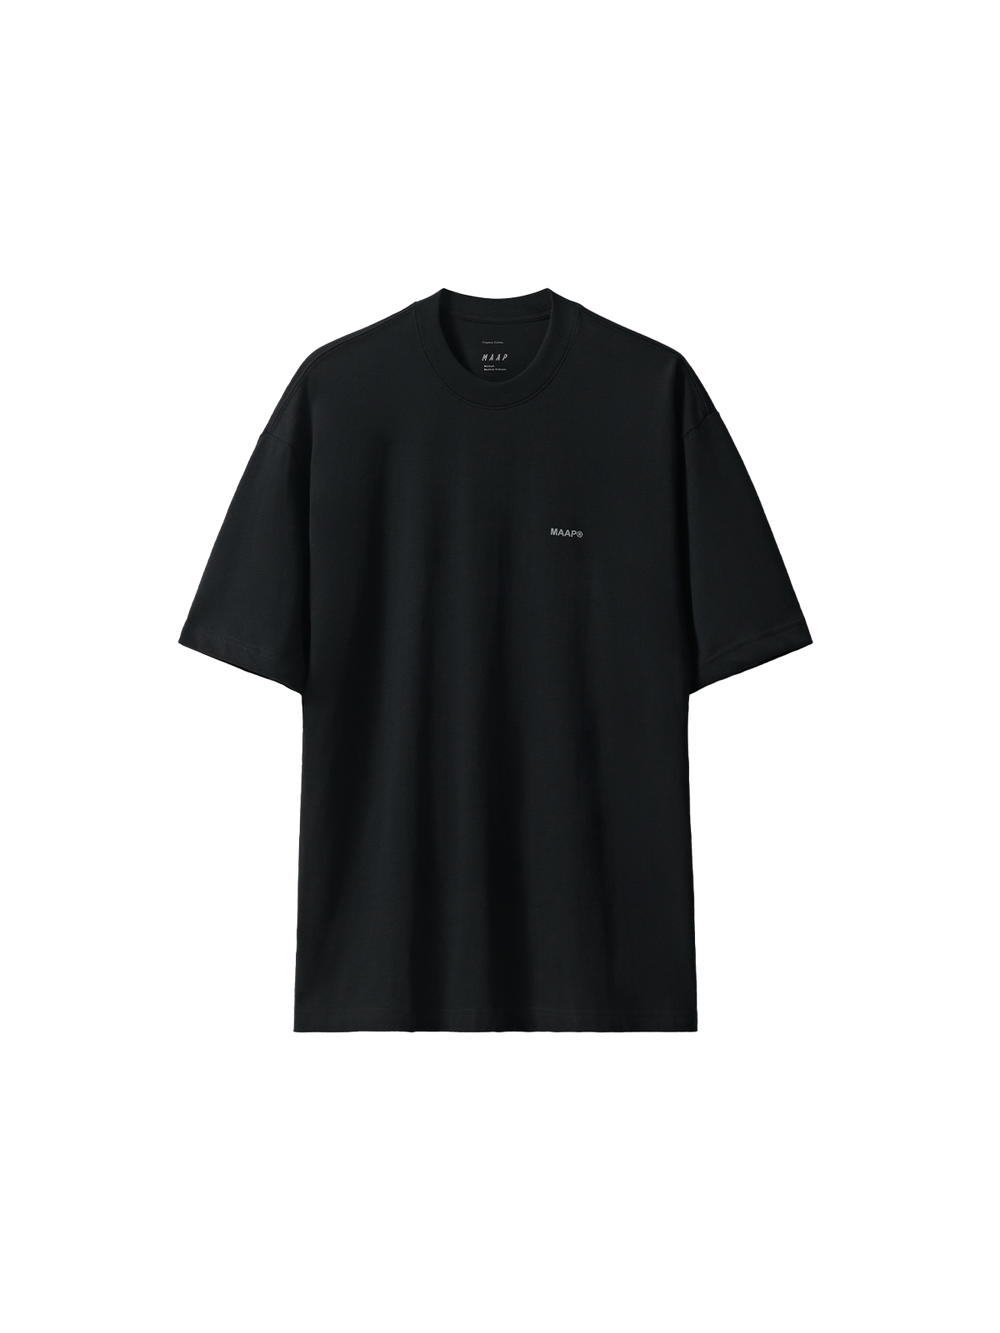 Product Image for Essentials Tee